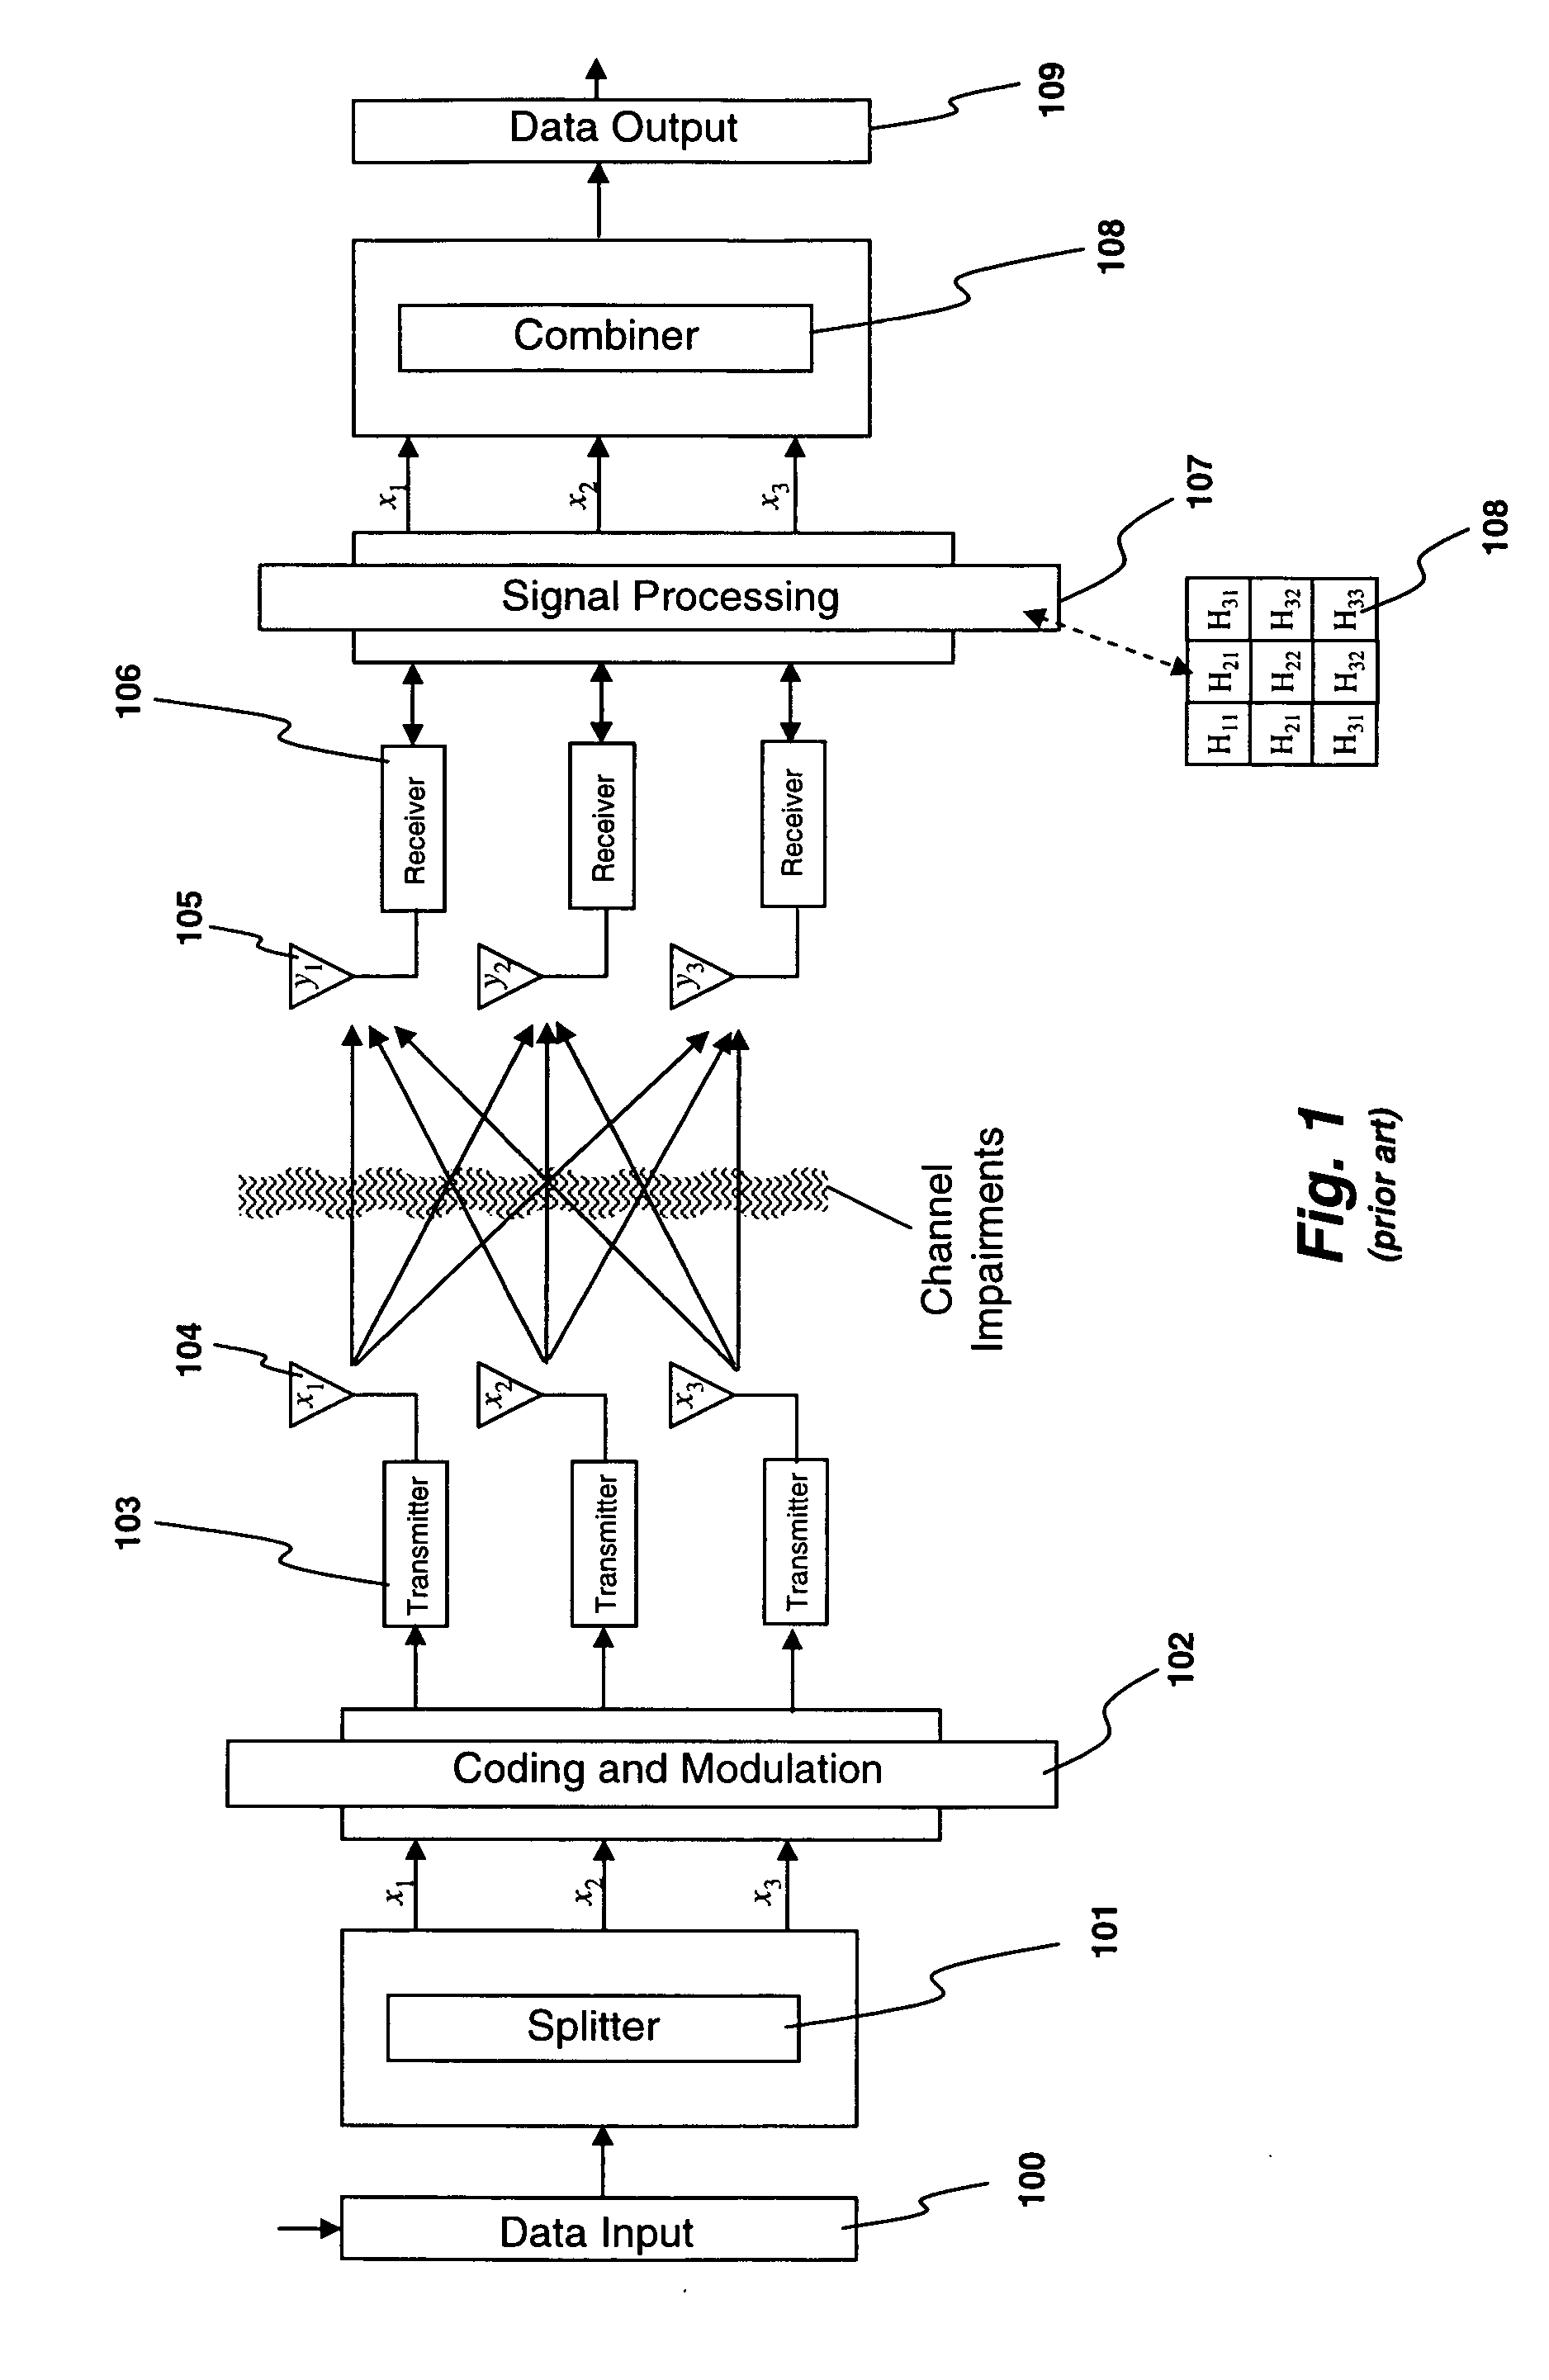 System and method for spatial-multiplexed tropospheric scatter communications